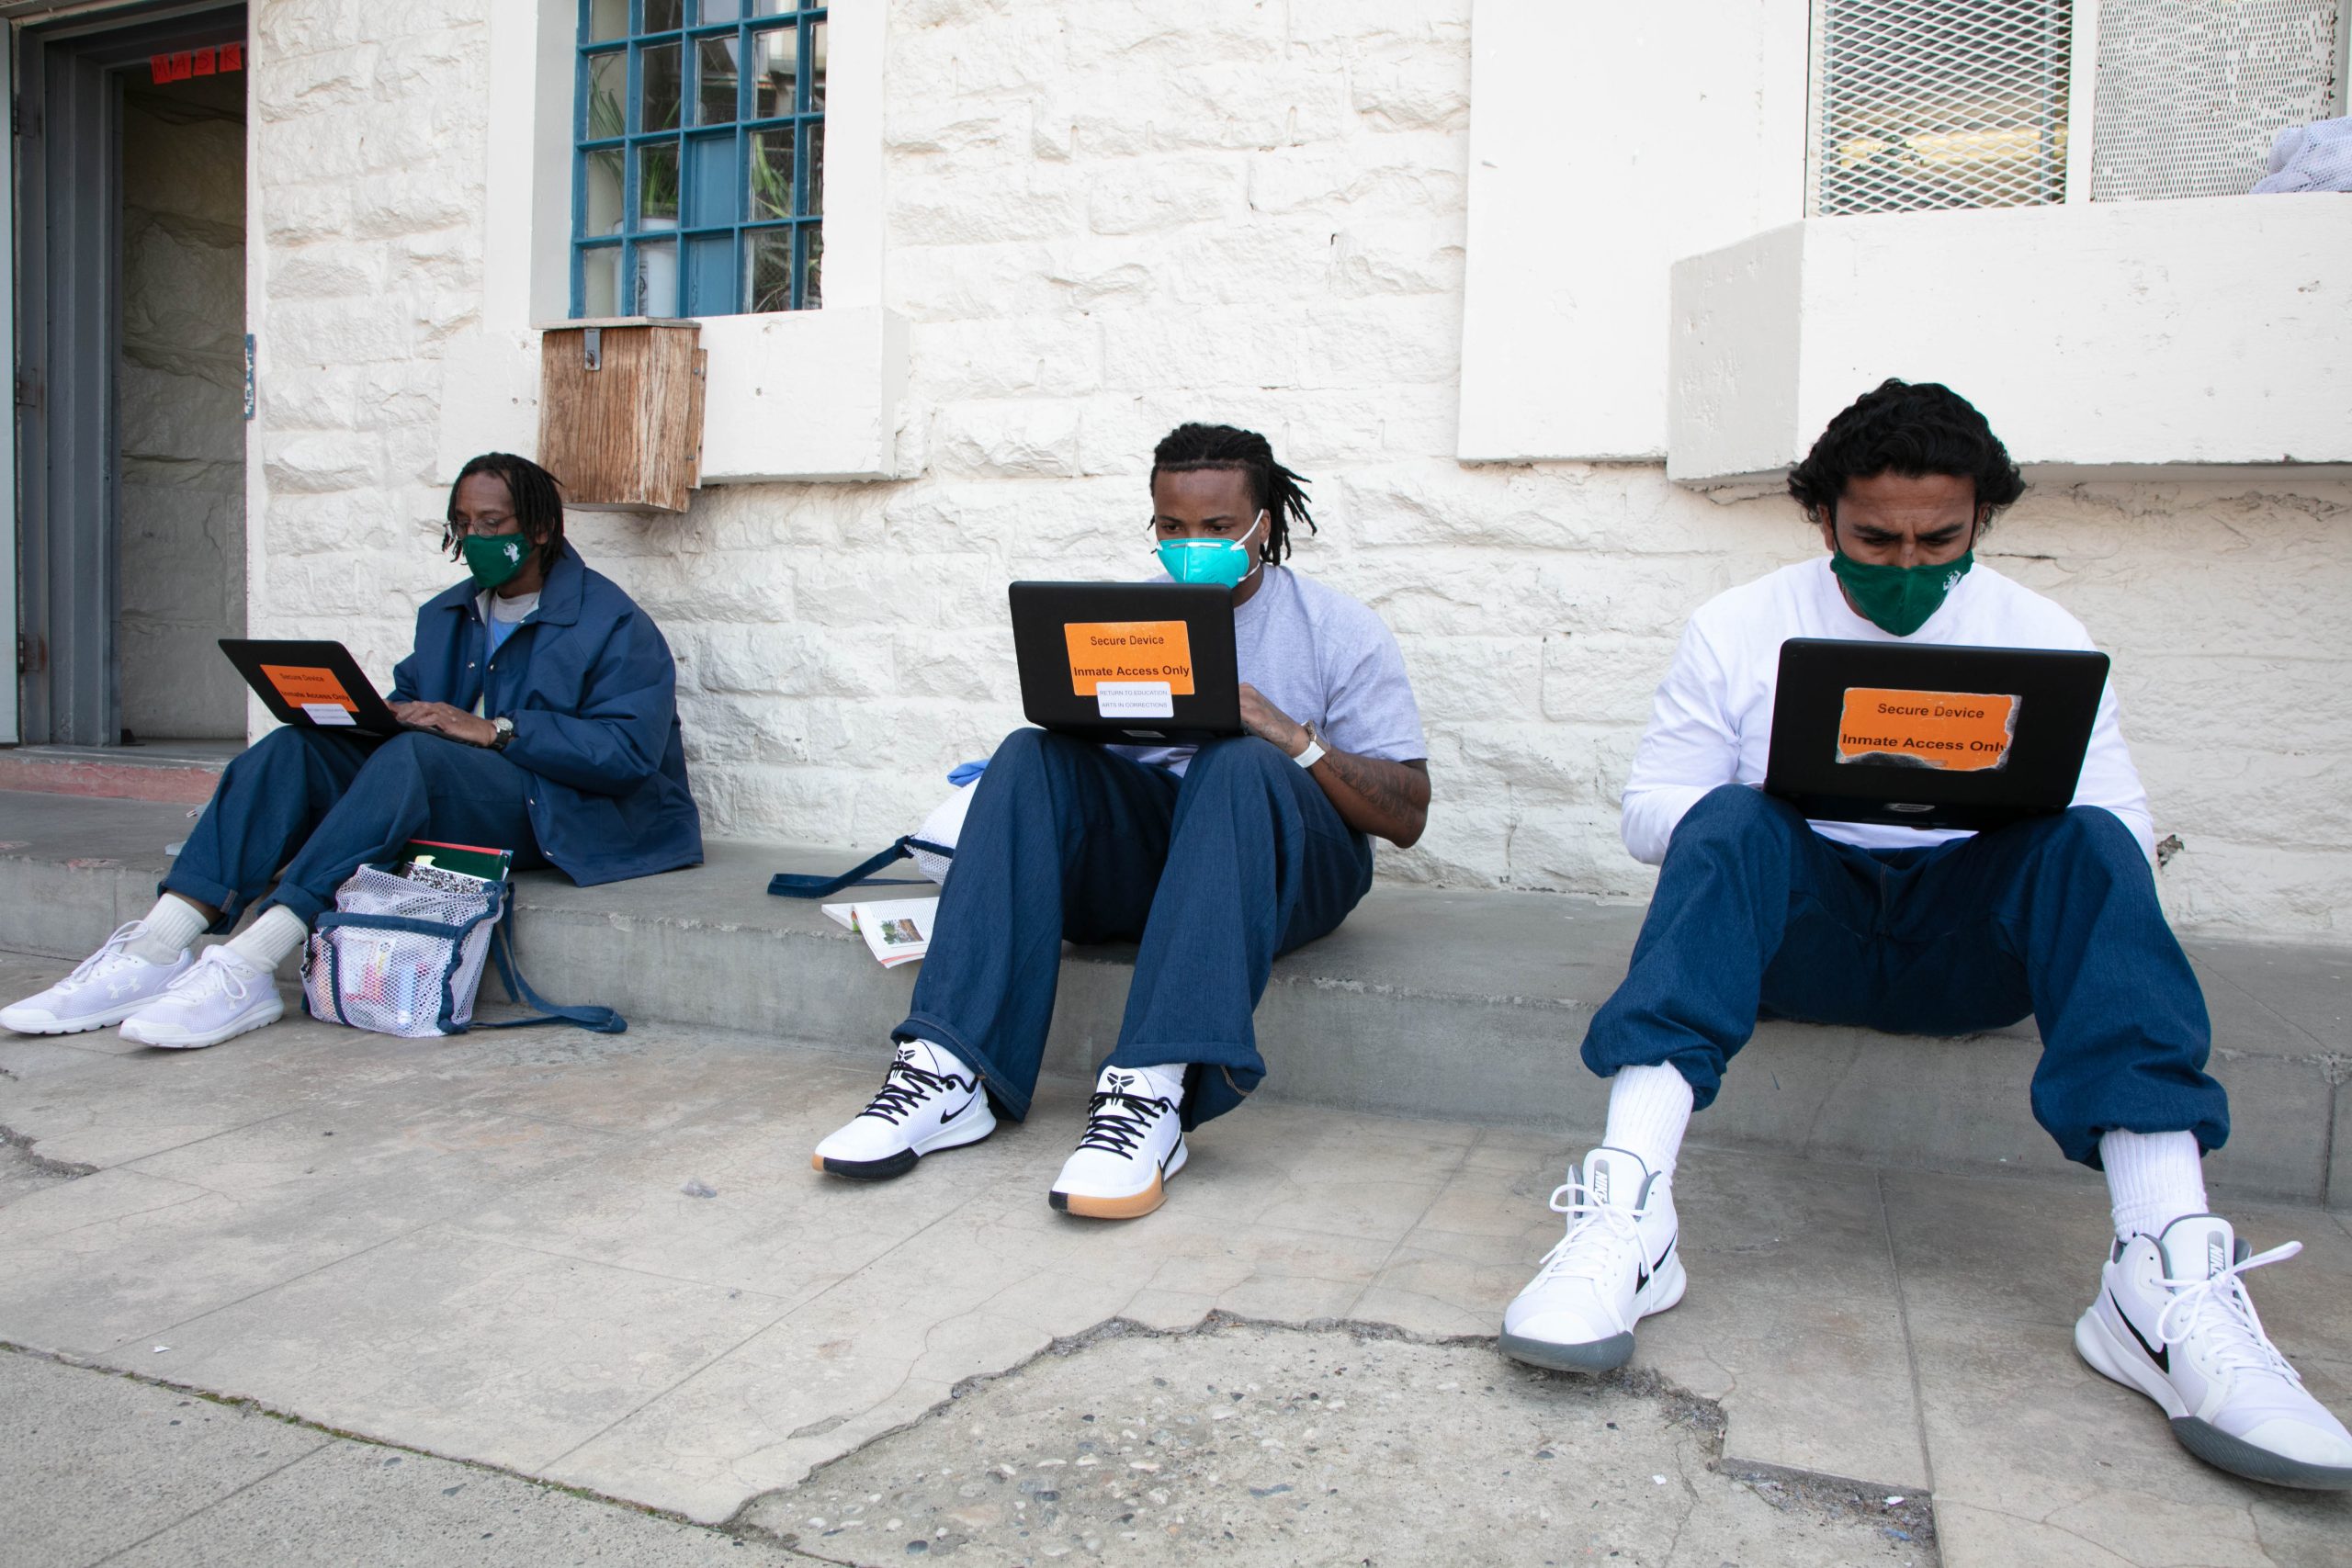 Three incarcerated men sitting against a brick wall and using laptops.